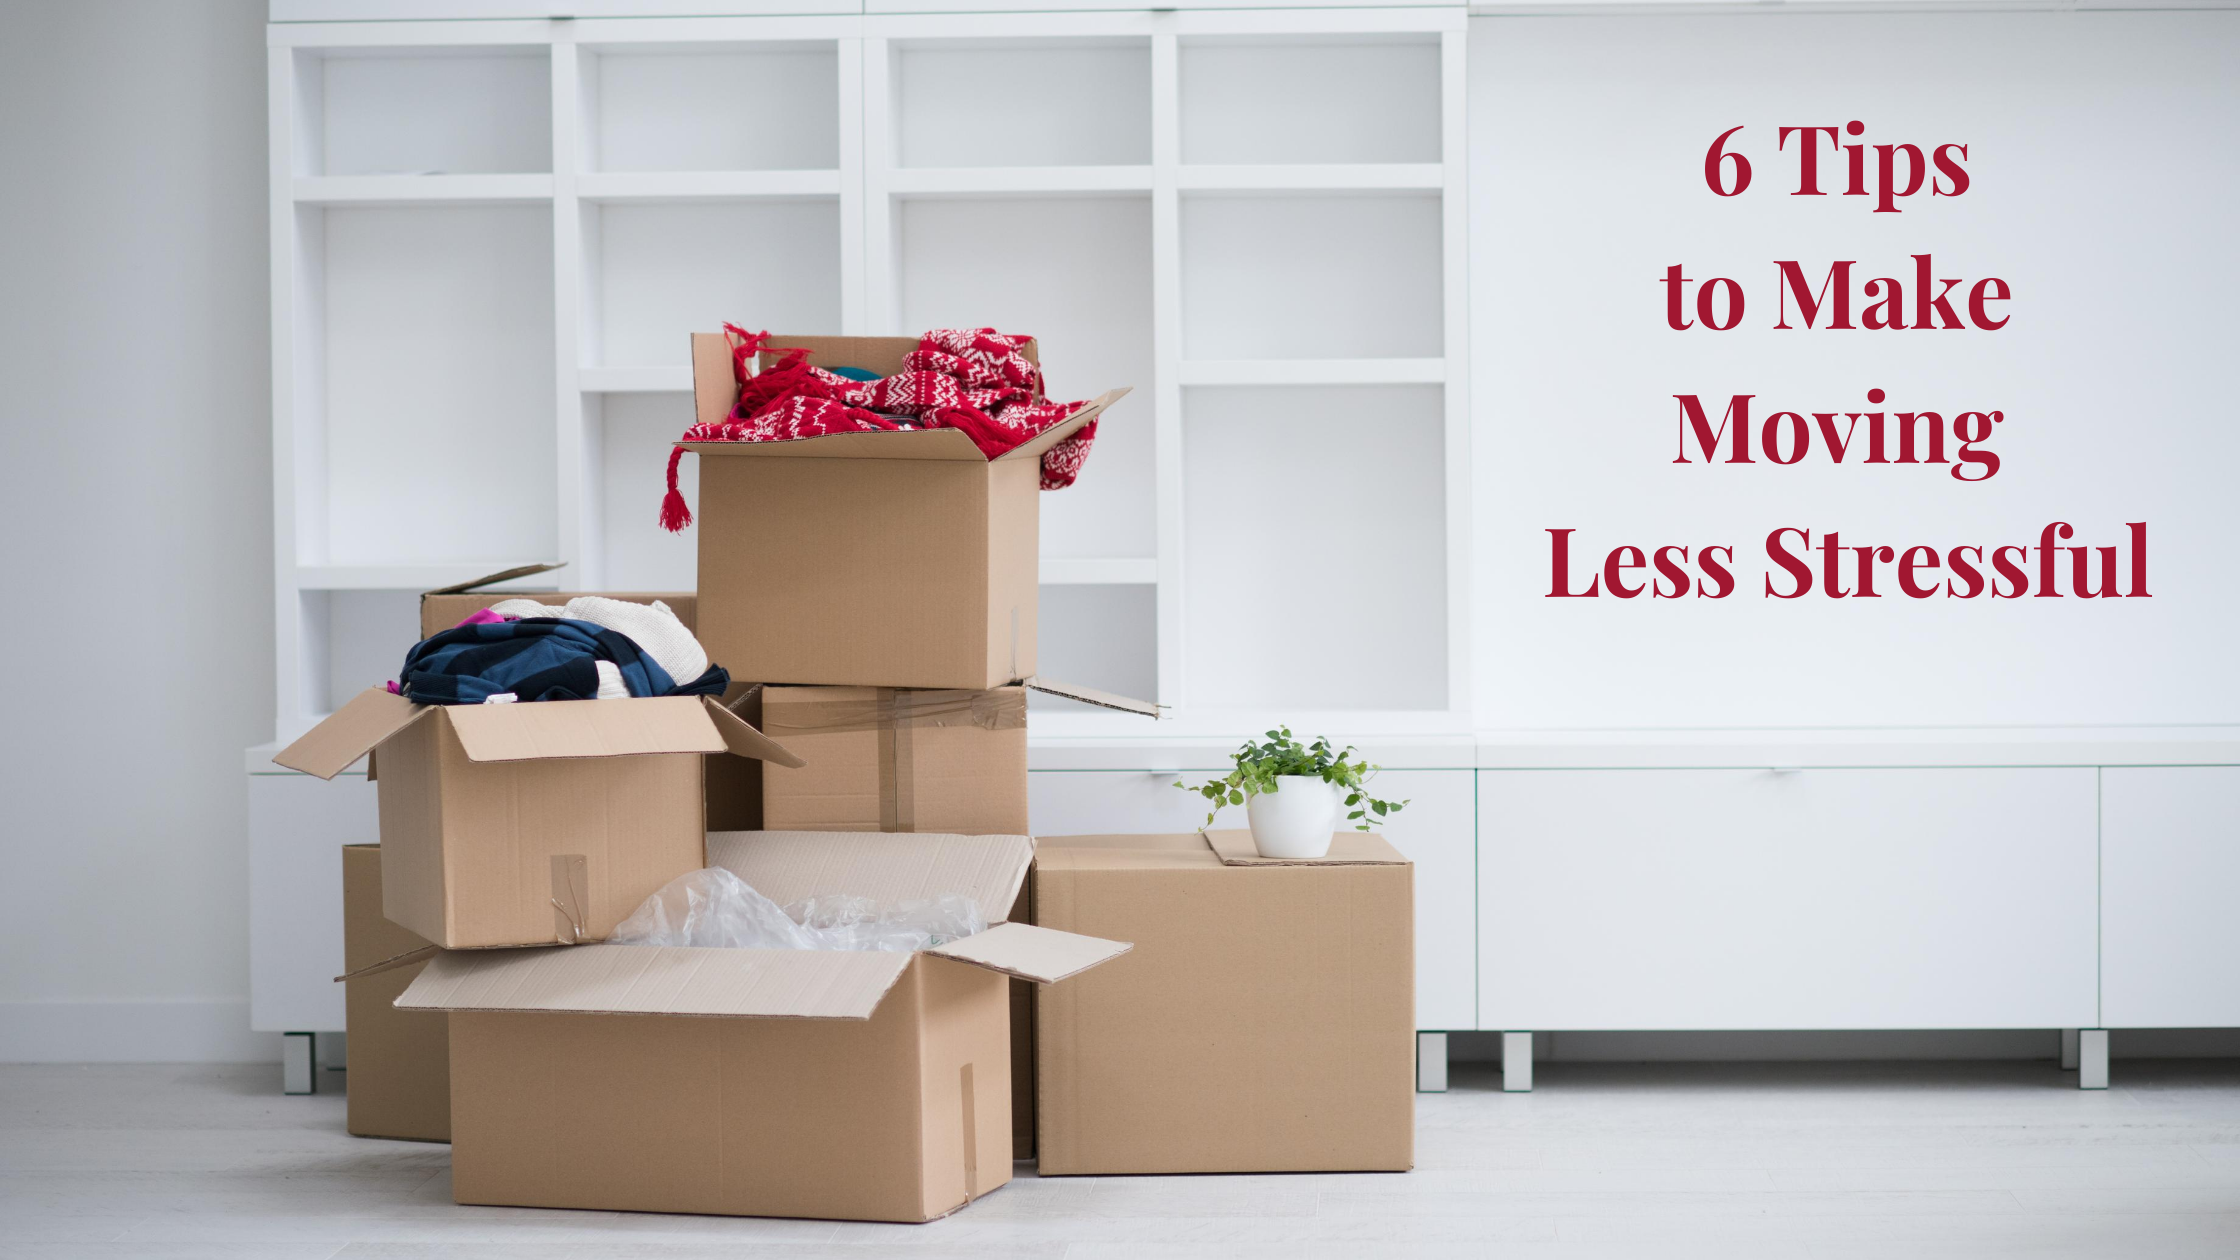 6 Tips to Make Moving Less Stressful